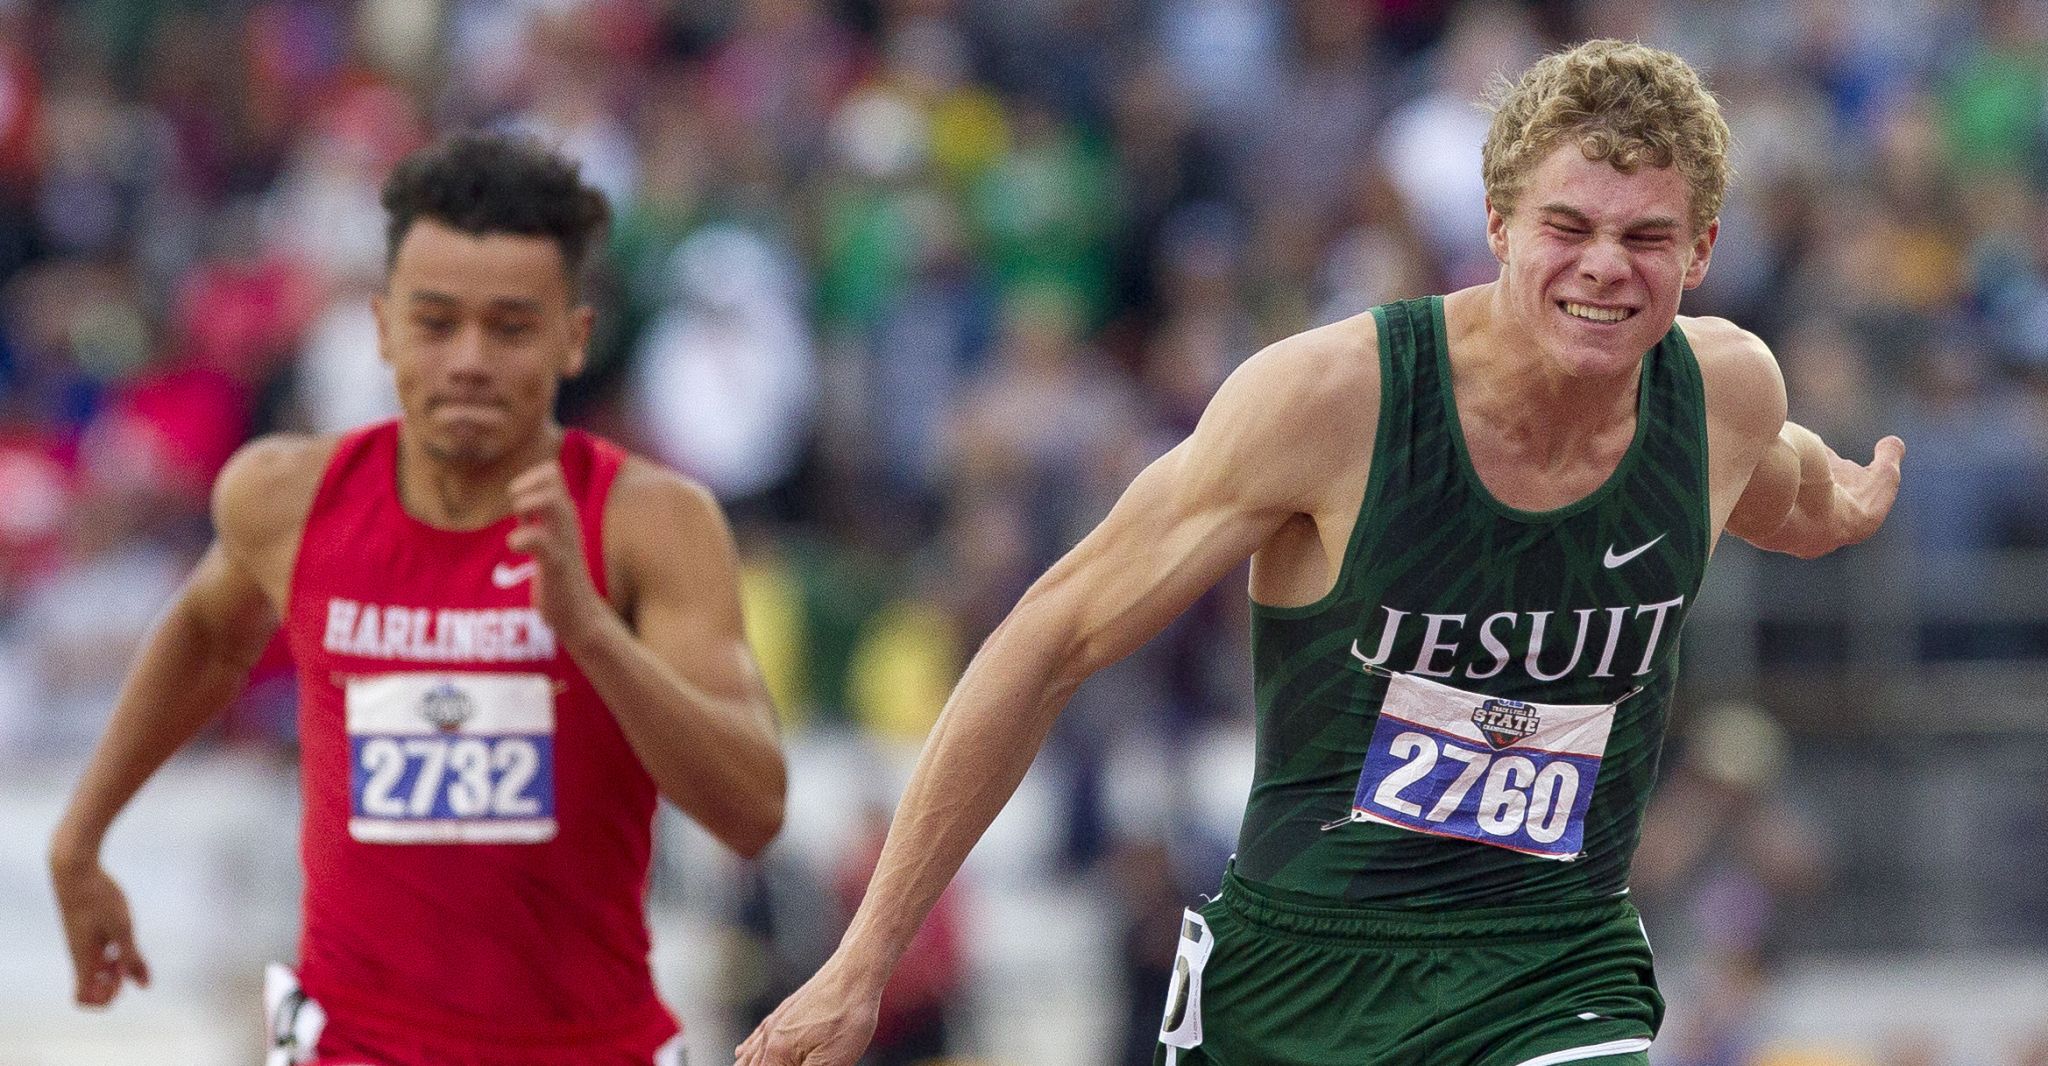 Strake Jesuit's Matthew Boling sets national high school record at state meet ...2048 x 1066